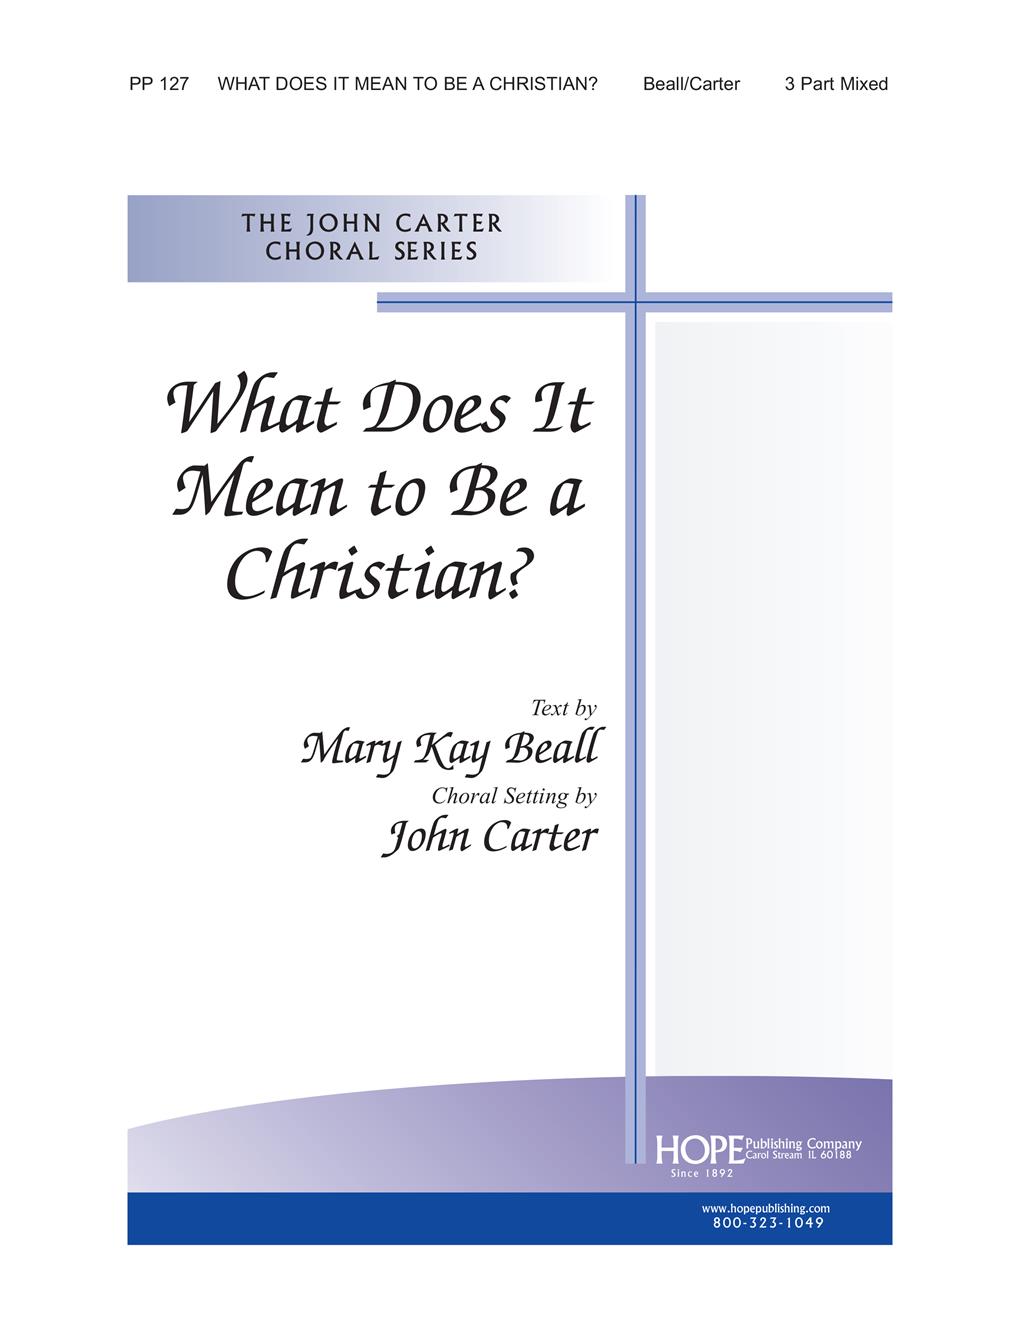 What Does It Mean to Be a Christian - 3 Part Mixed Cover Image